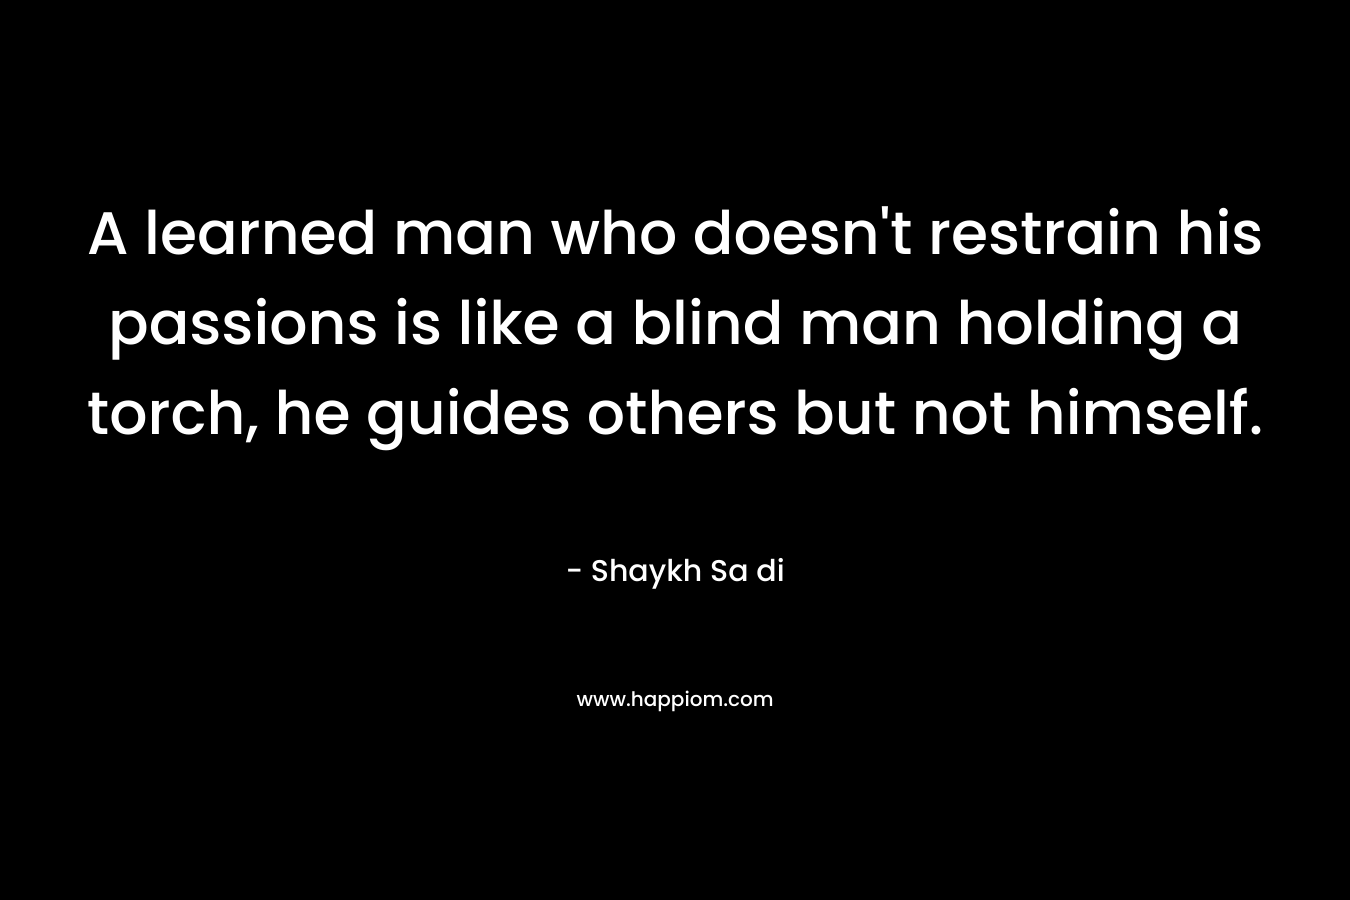 A learned man who doesn’t restrain his passions is like a blind man holding a torch, he guides others but not himself. – Shaykh Sa di